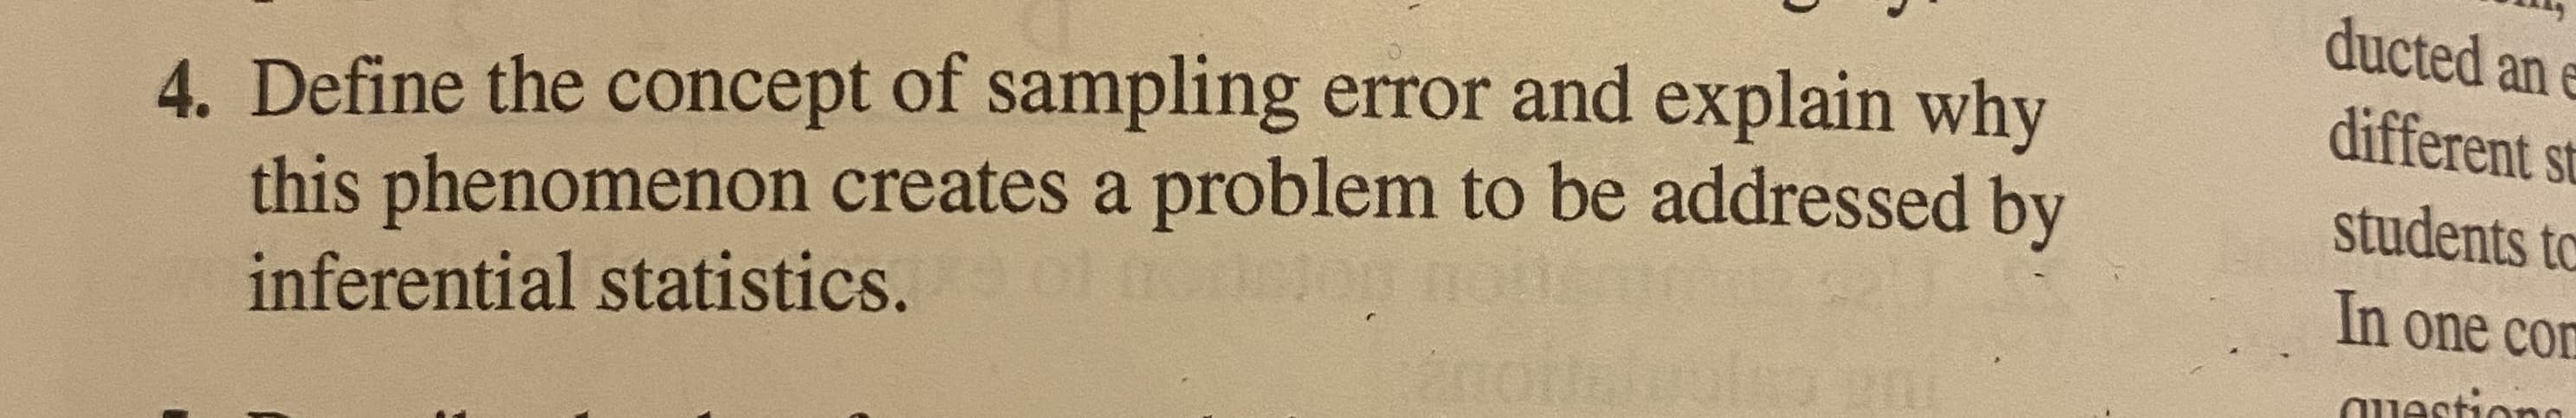 Define the concept of sampling error and explain why
this phenomenon creates a problem to be addressed by
inferential statistics.
doton
